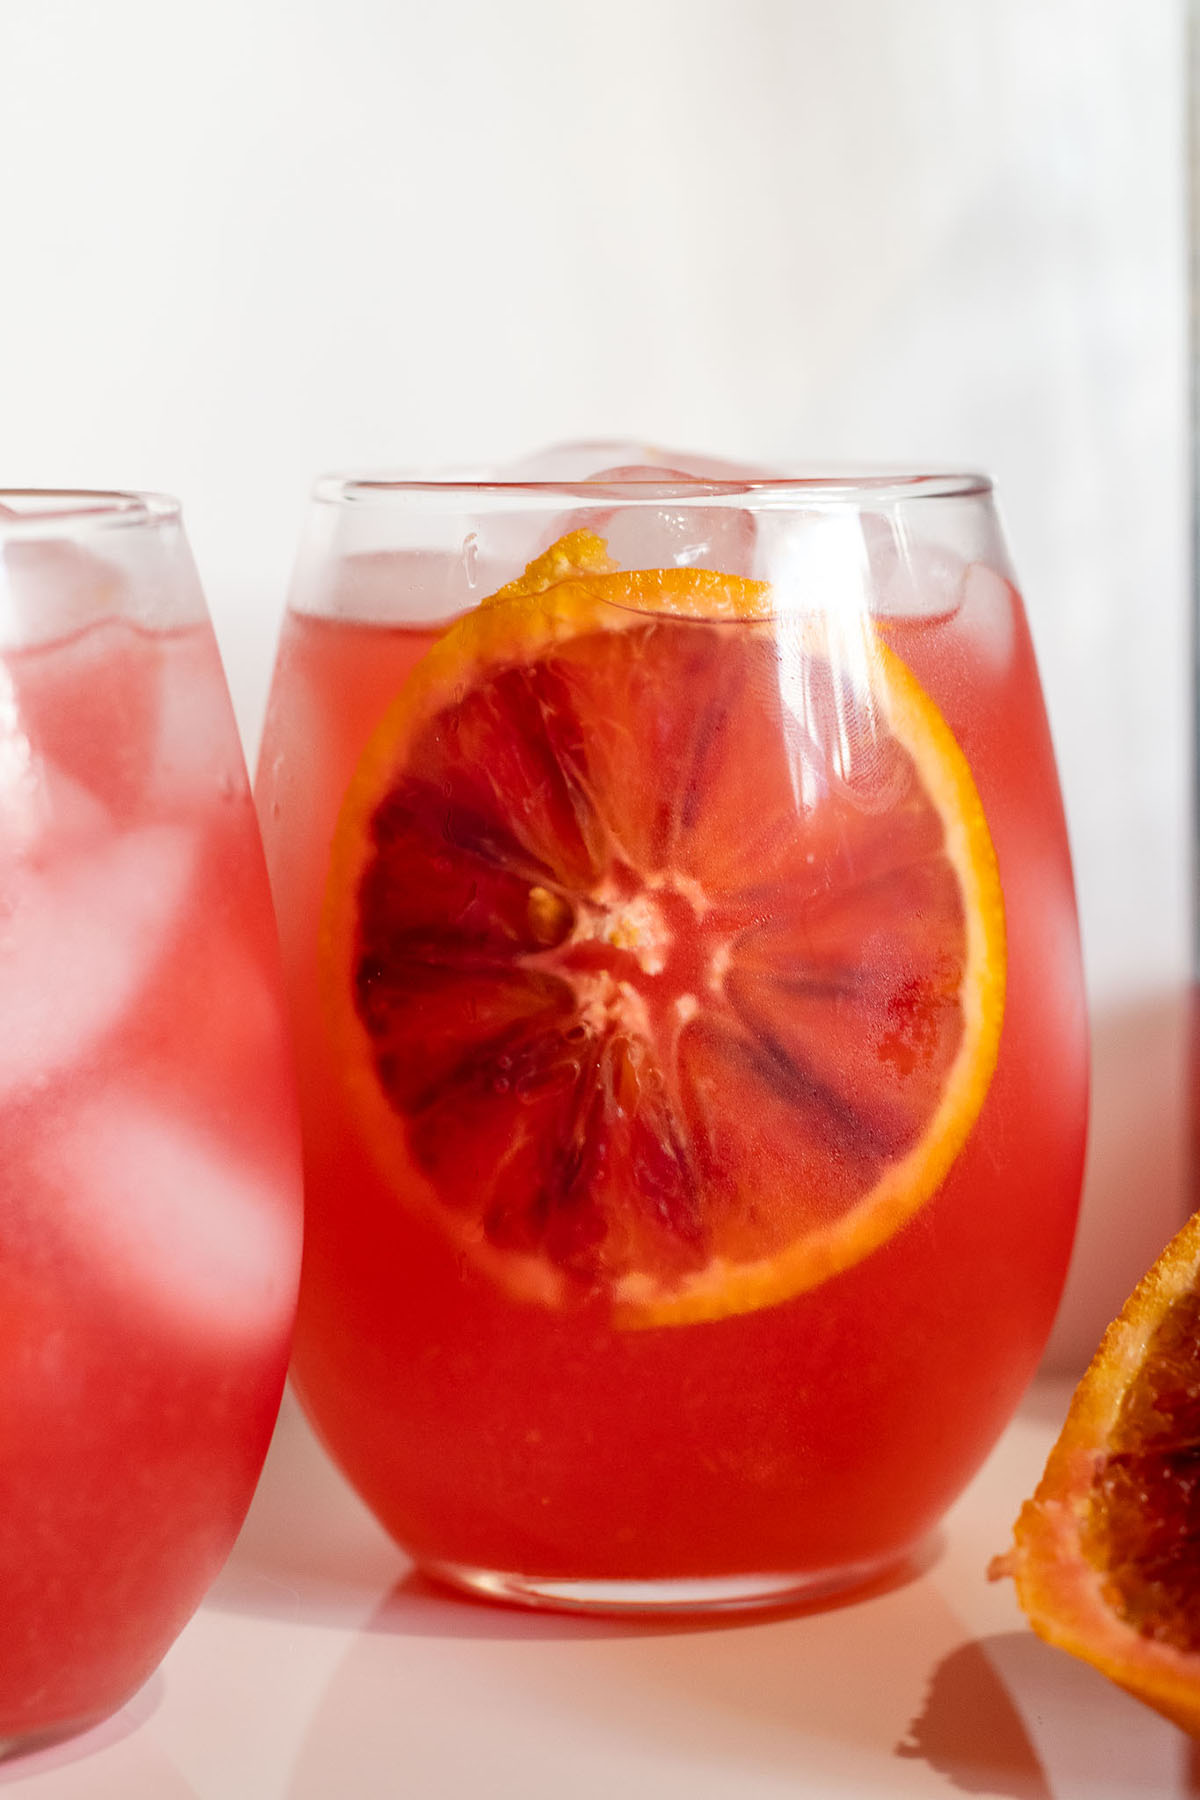 Crisp and refreshing blood orange lemonade with a slice dipped in.